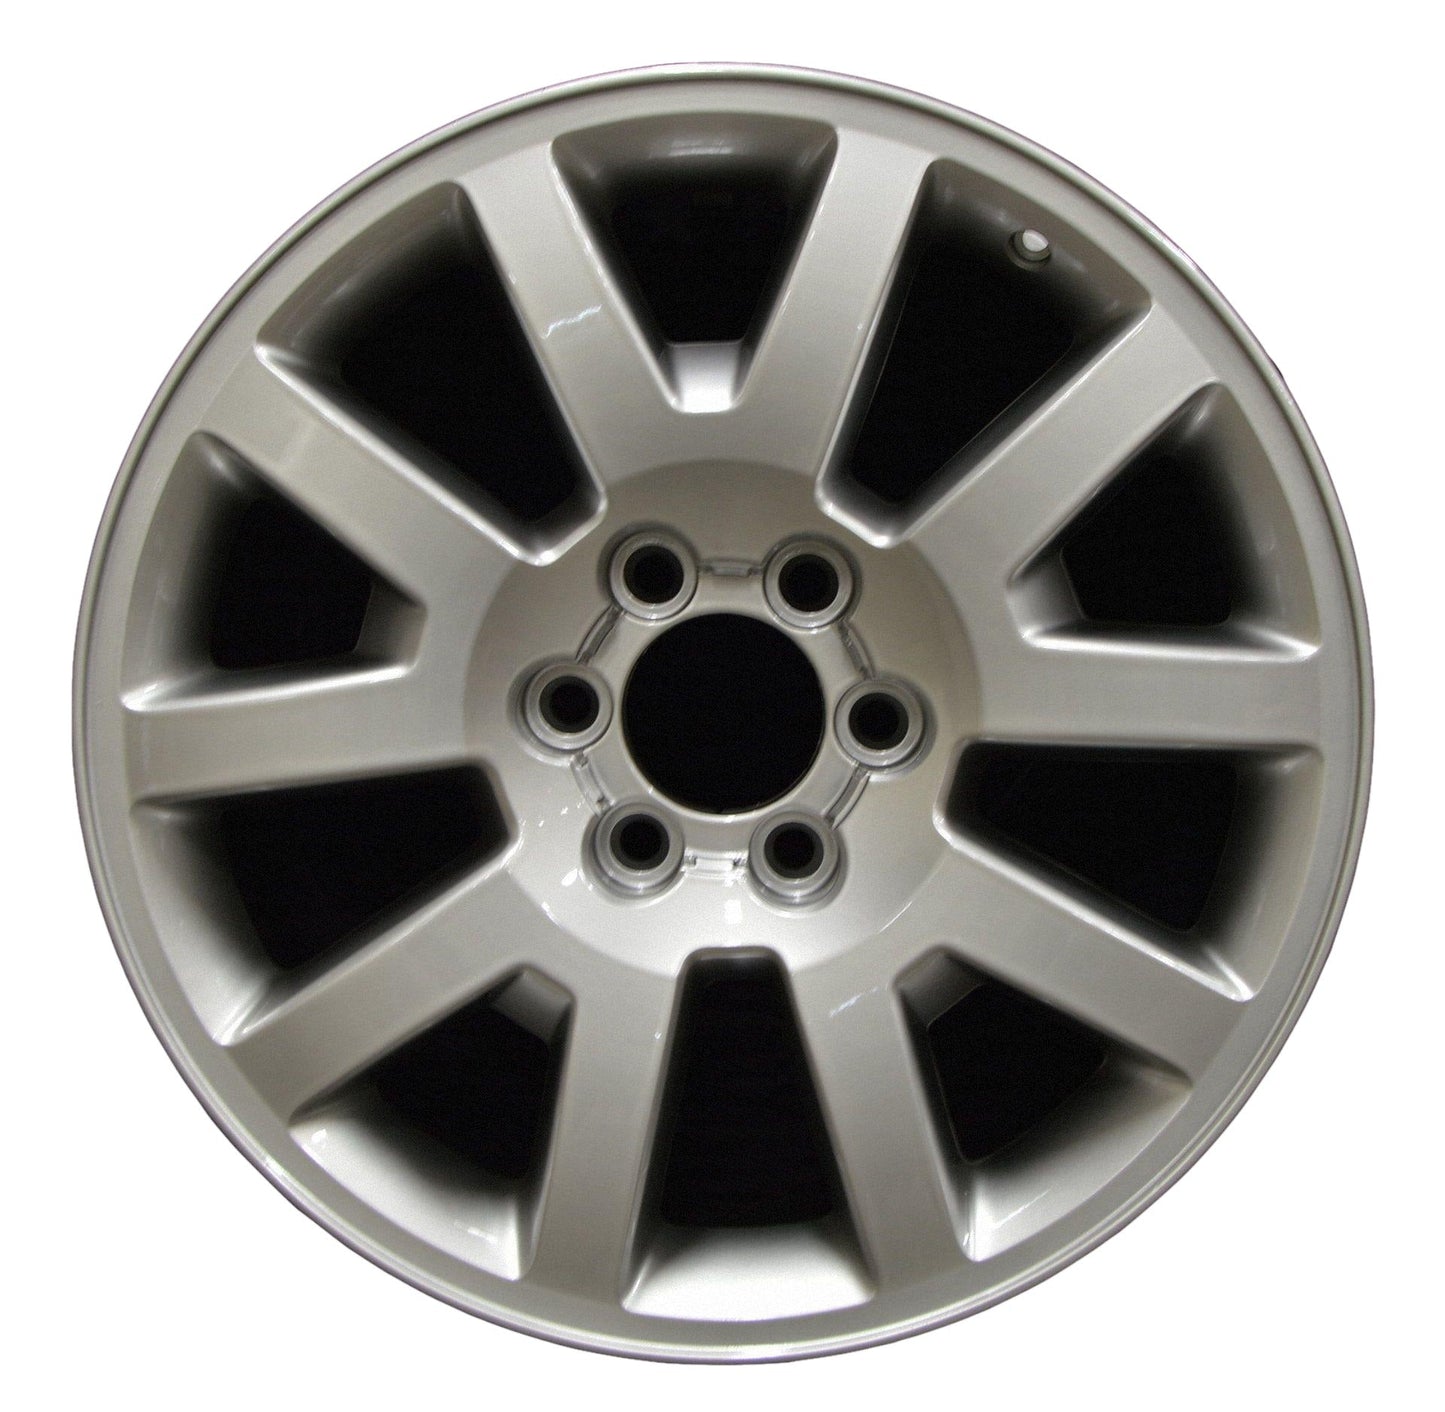 Ford Expedition  2011, 2012, 2013, 2014 Factory OEM Car Wheel Size 20x8.5 Alloy WAO.3789.PB01_LS42.FF